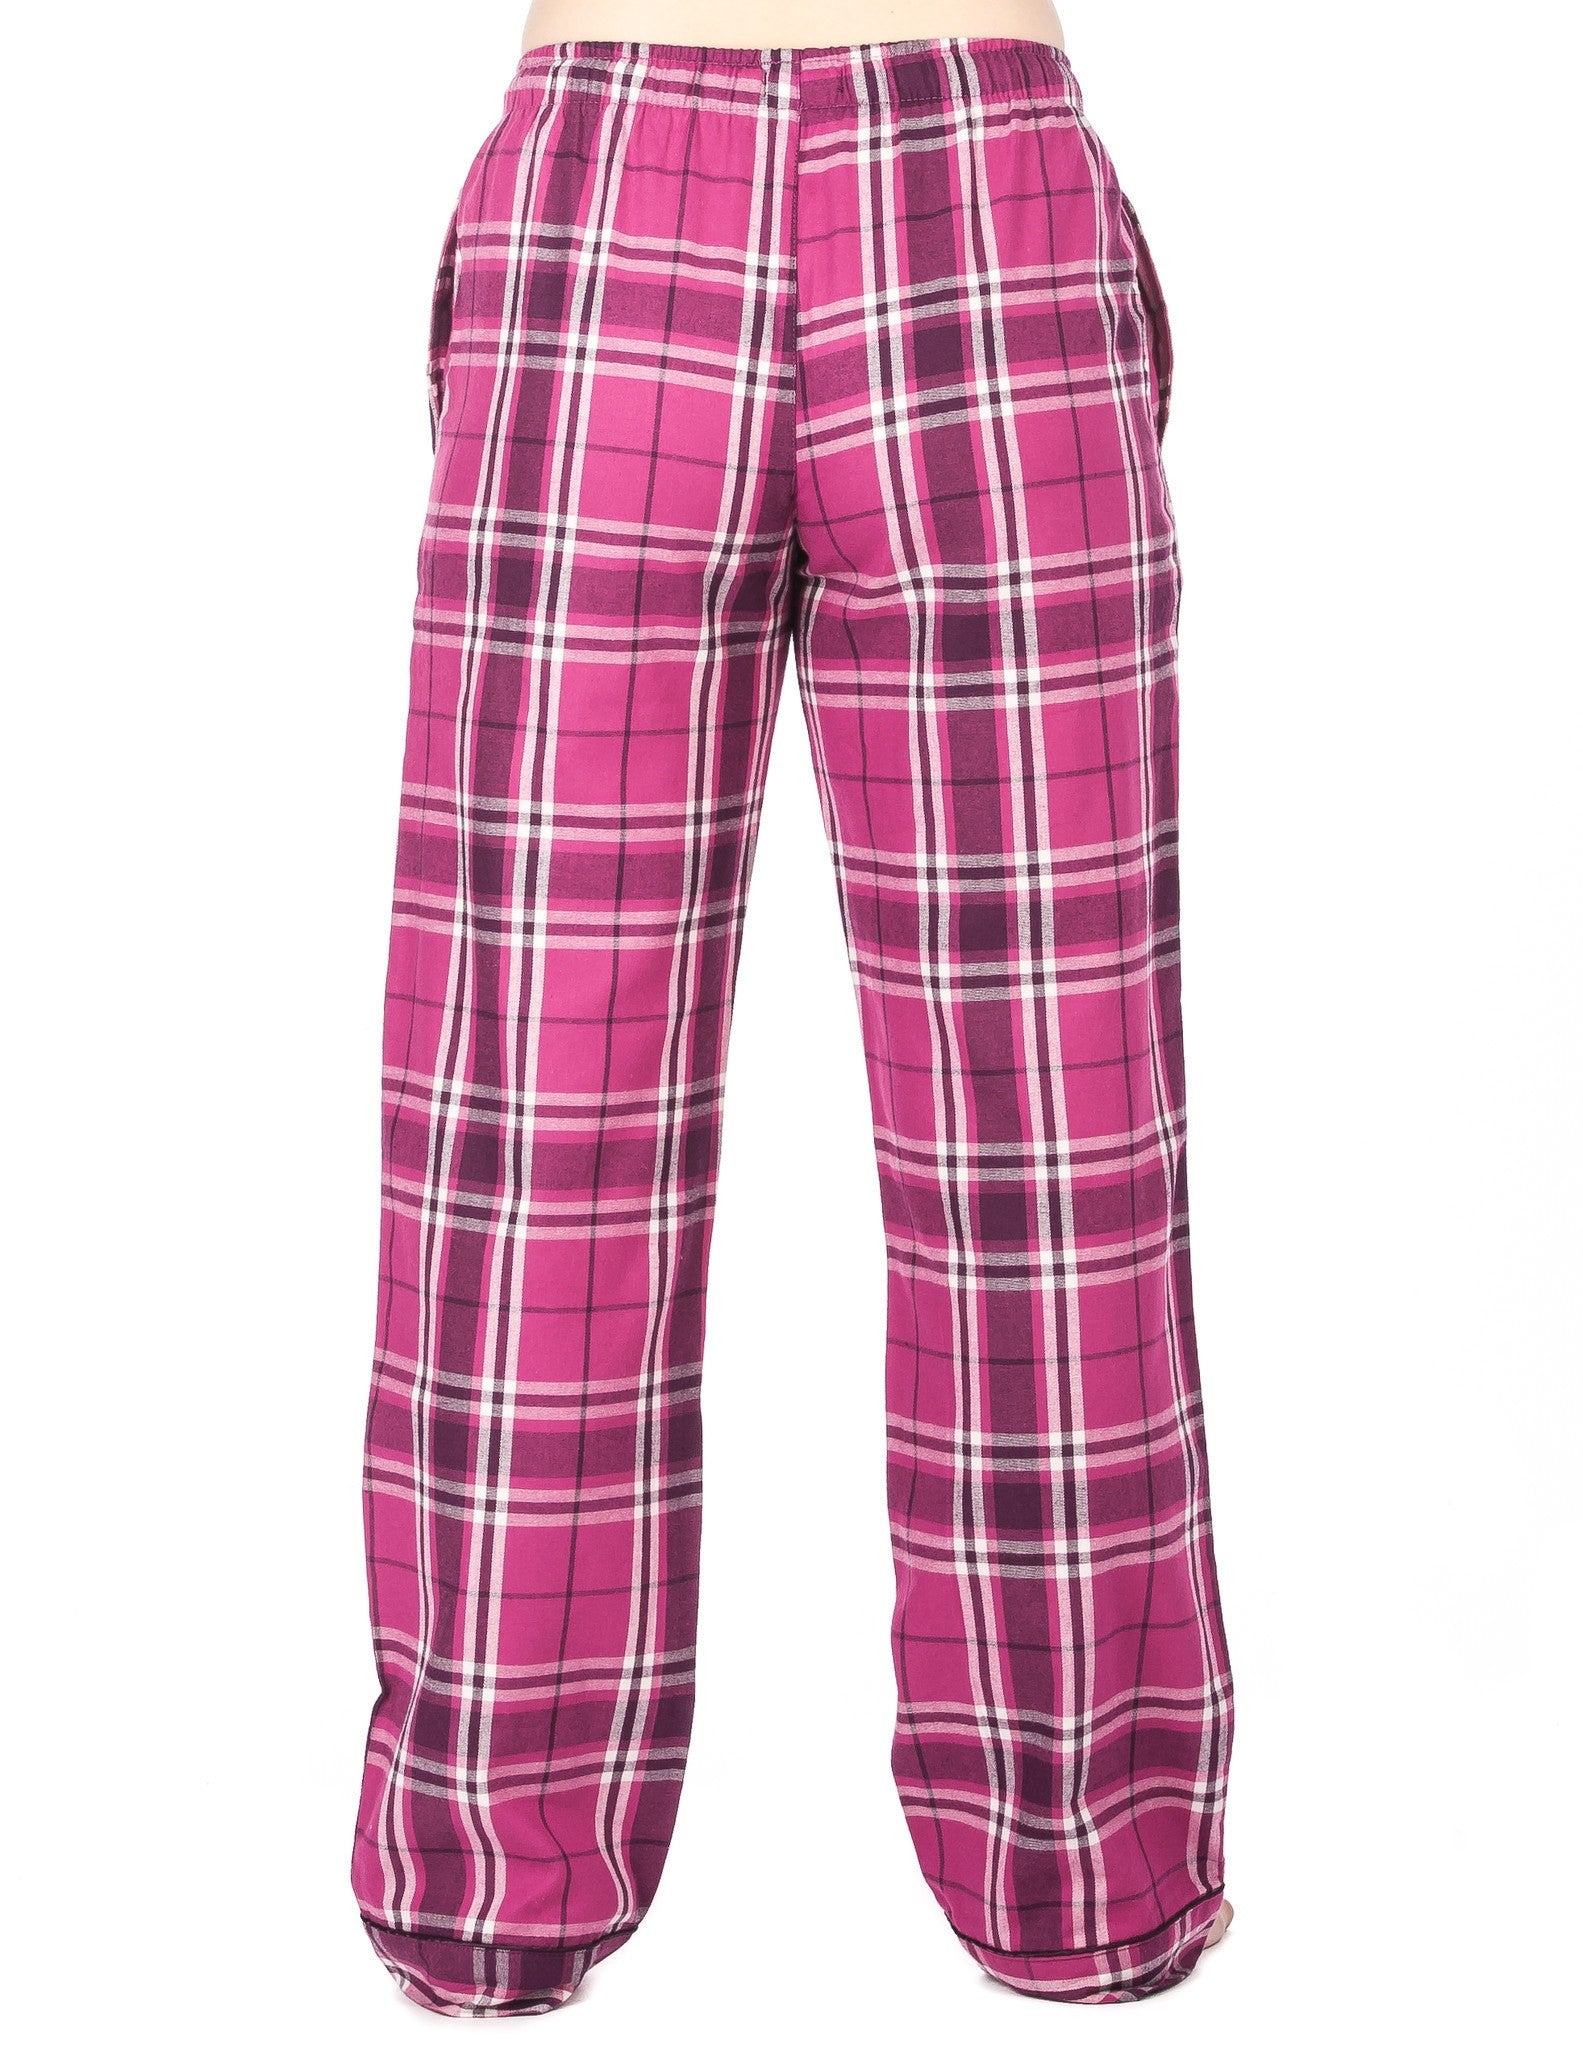 Women's Cotton Flannel Lounge Pants (2 Pack) - Relaxed Fit – Noble Mount